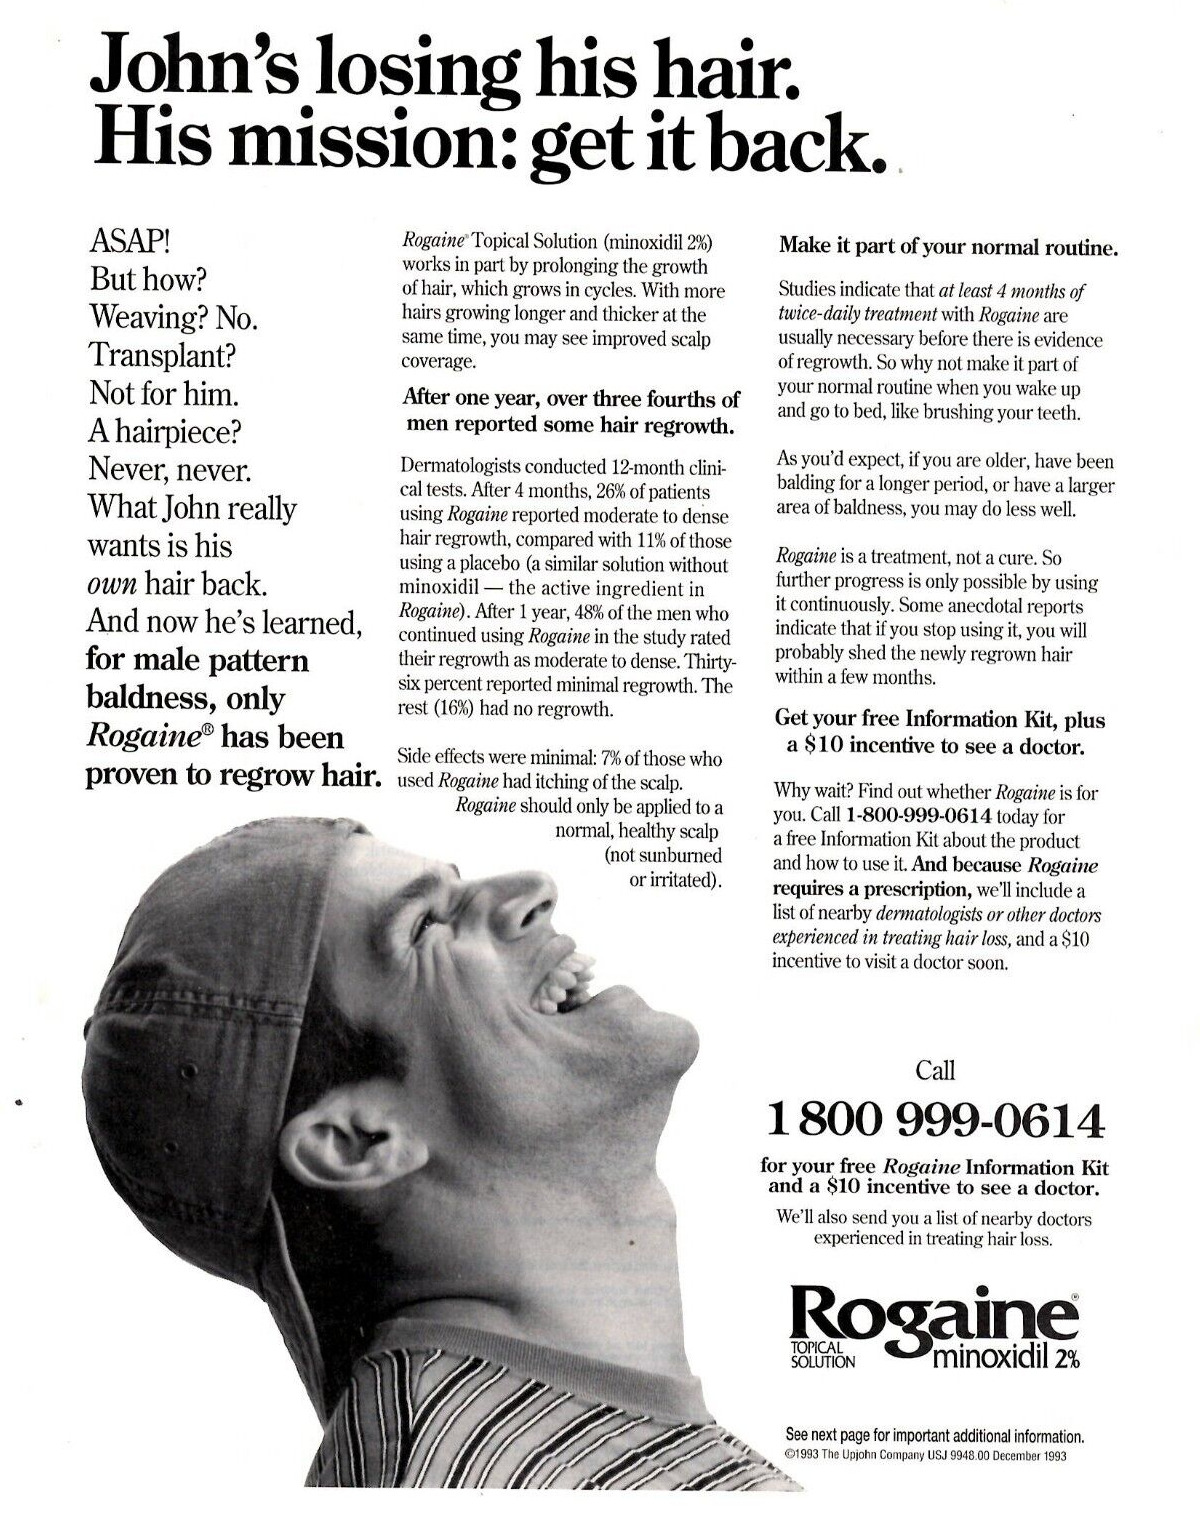 1994 Print Ad Upjohn Company Rogaine John's losing his hair  w mail in card